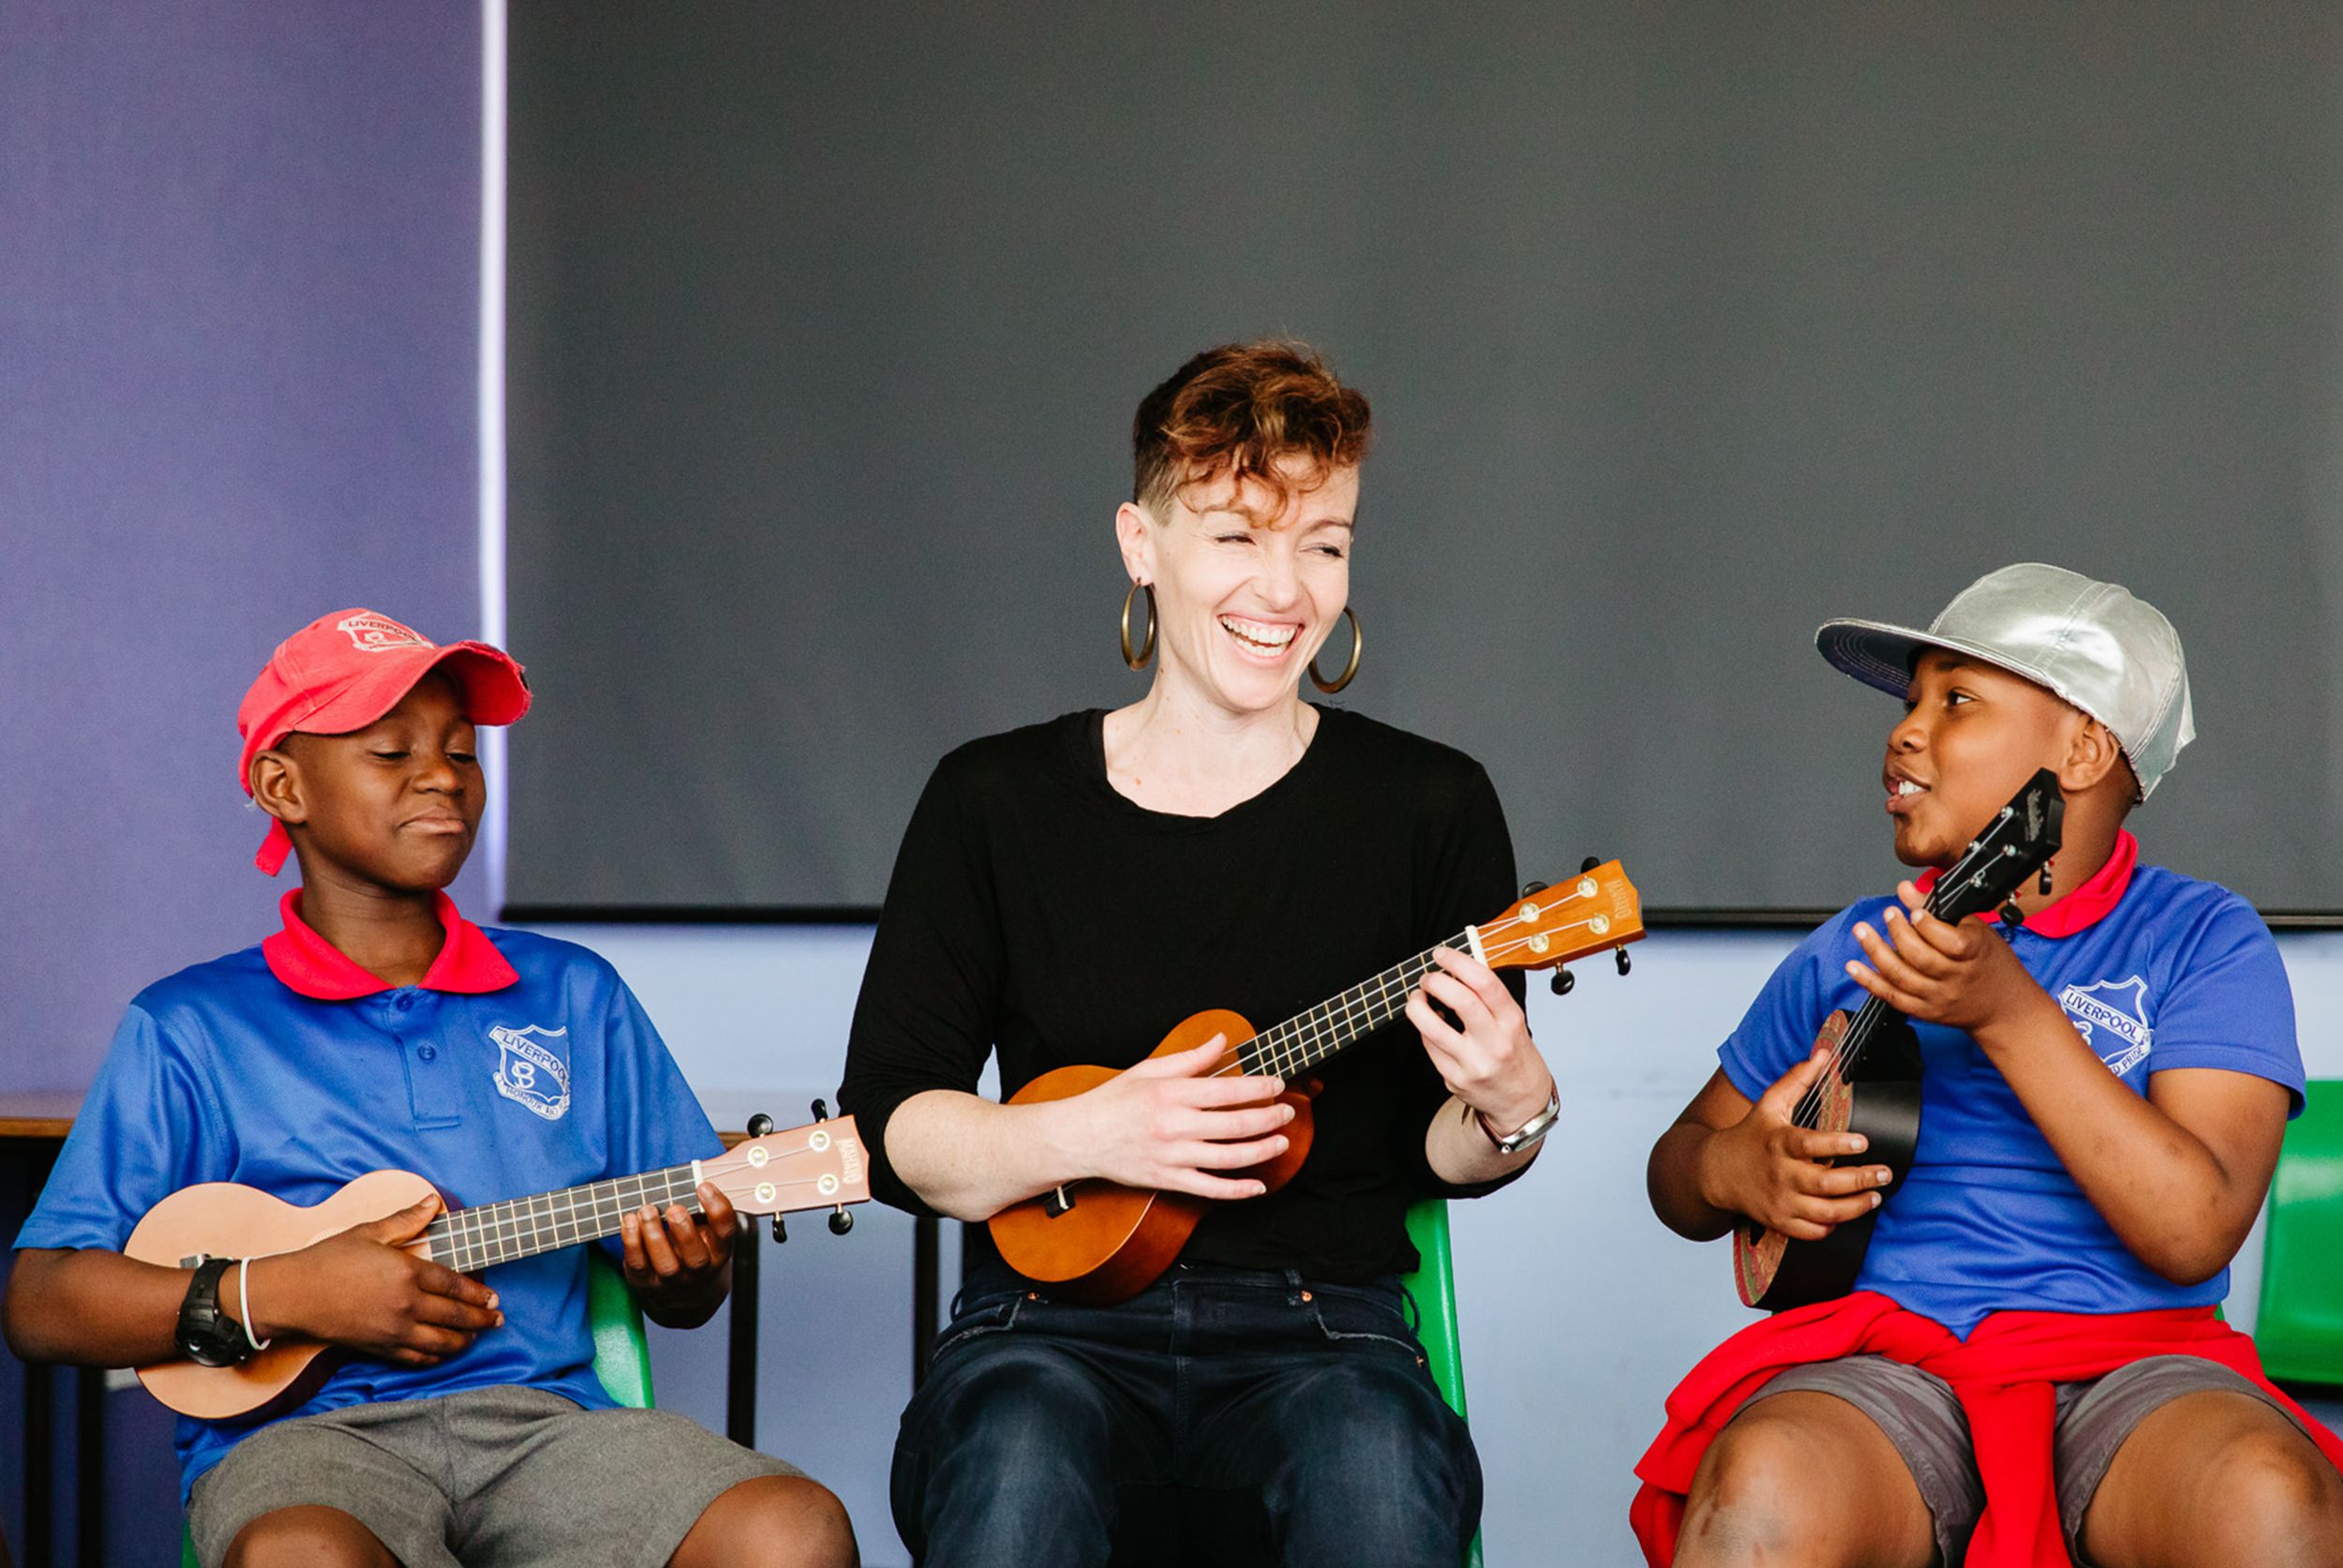 The Song Room Teaching Artist teaching two primary school students an arts learning music lesson in ukulele